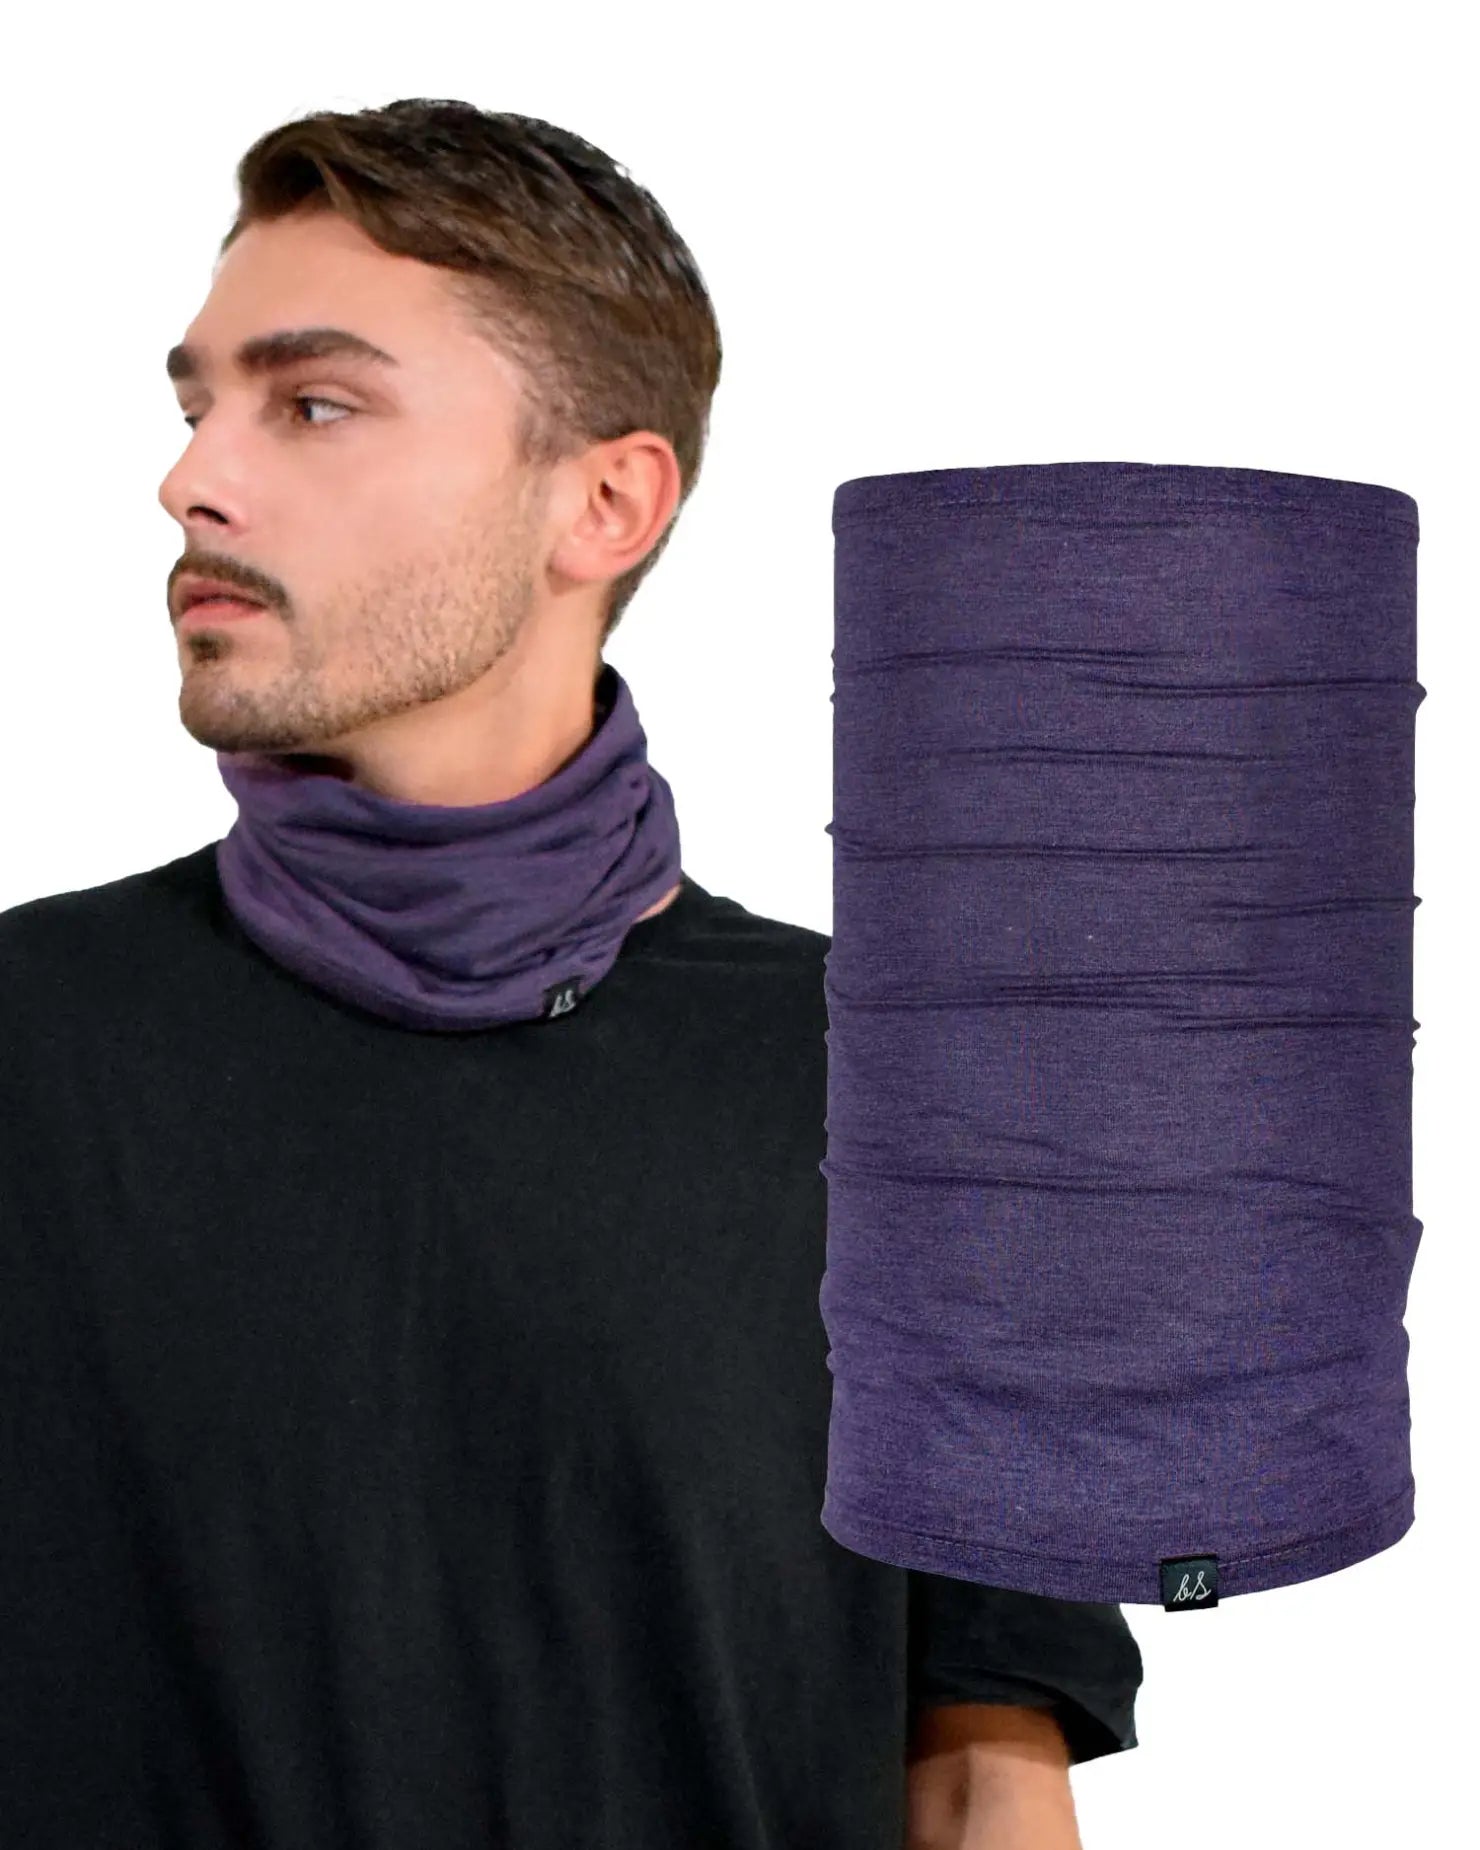 Fashionable man in purple scarf and black shirt wearing Cotton Sports Snood Neck Gaiter.